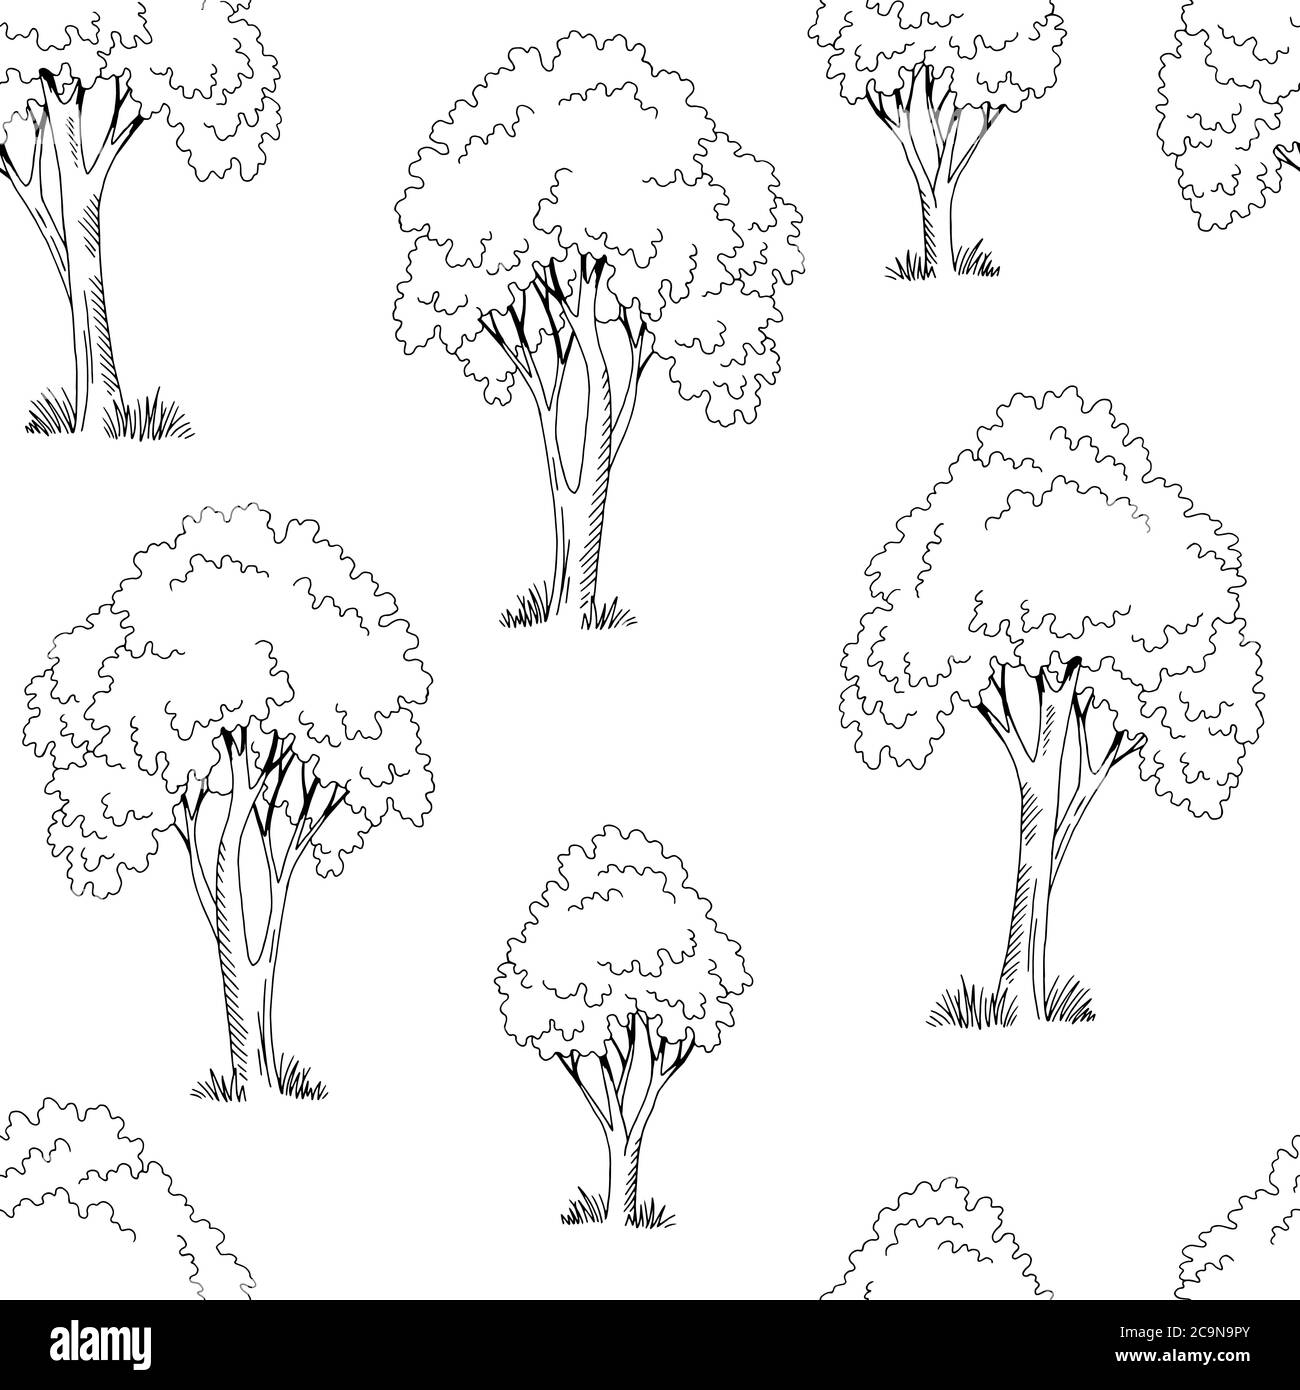 Tree graphic black white seamless pattern background sketch illustration vector Stock Vector